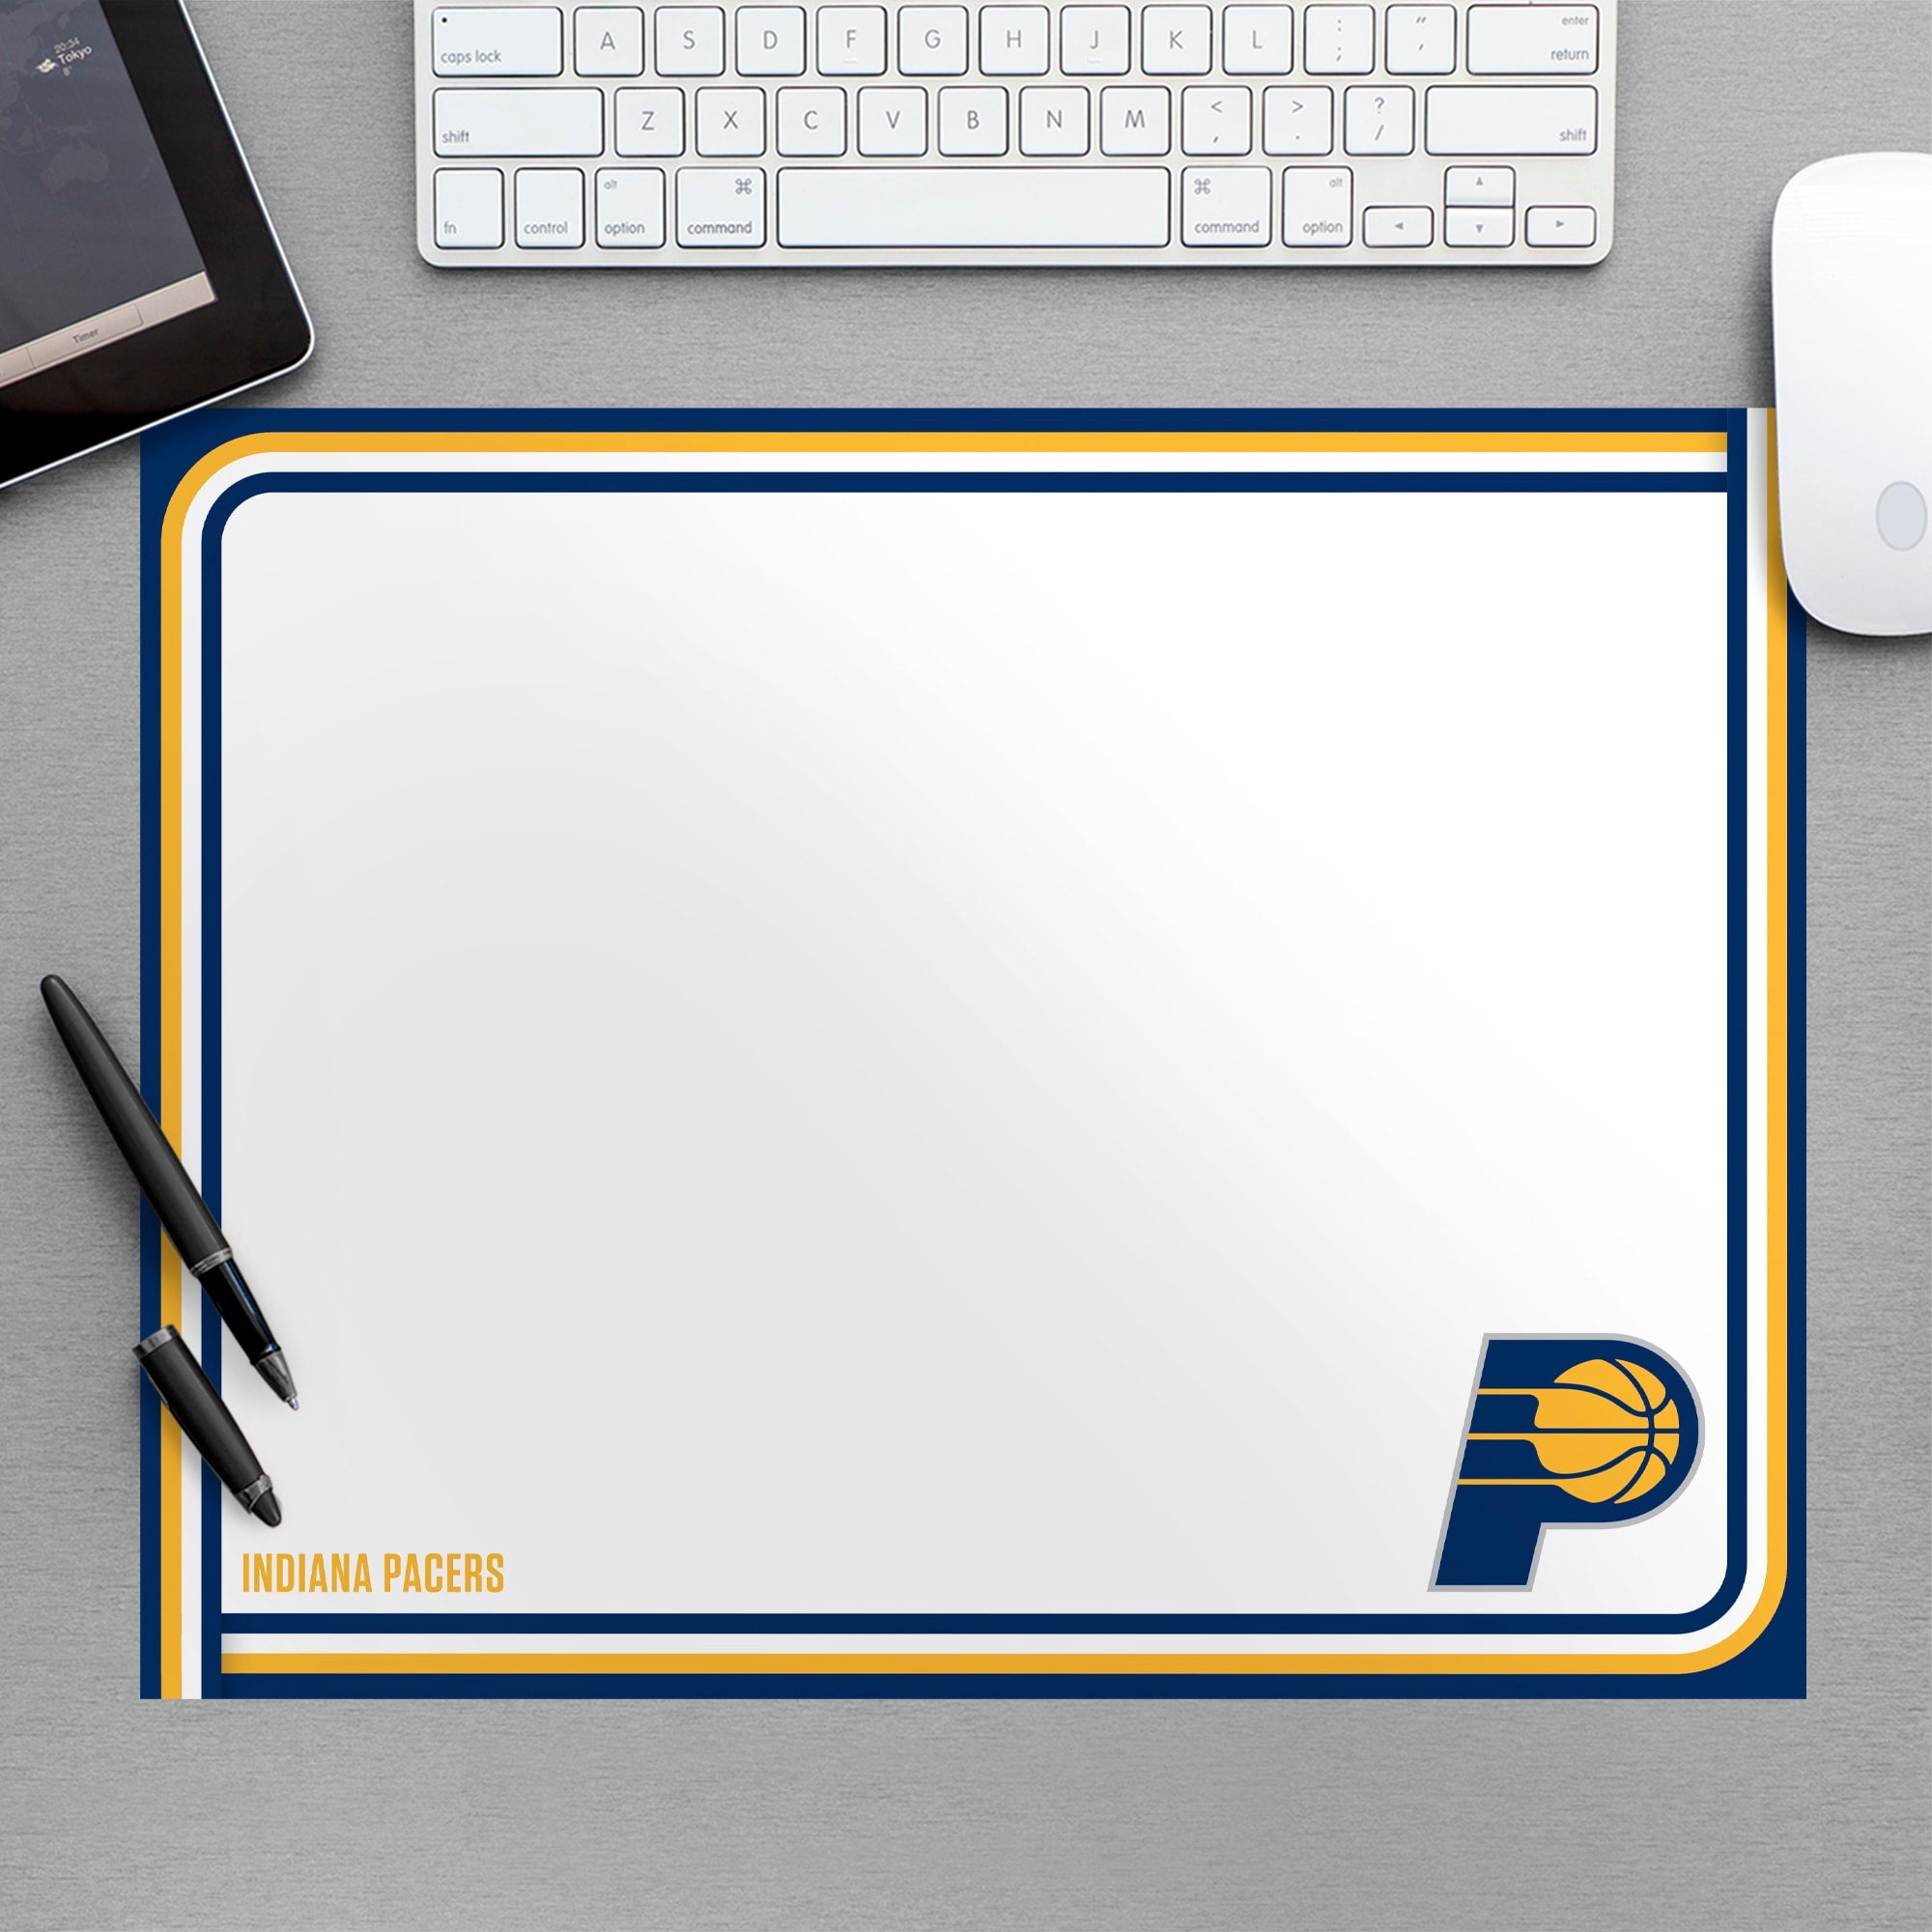 Indiana Pacers for Indiana Pacers: Dry Erase Whiteboard - Officially Licensed NBA Removable Wall Decal Large by Fathead | Vinyl